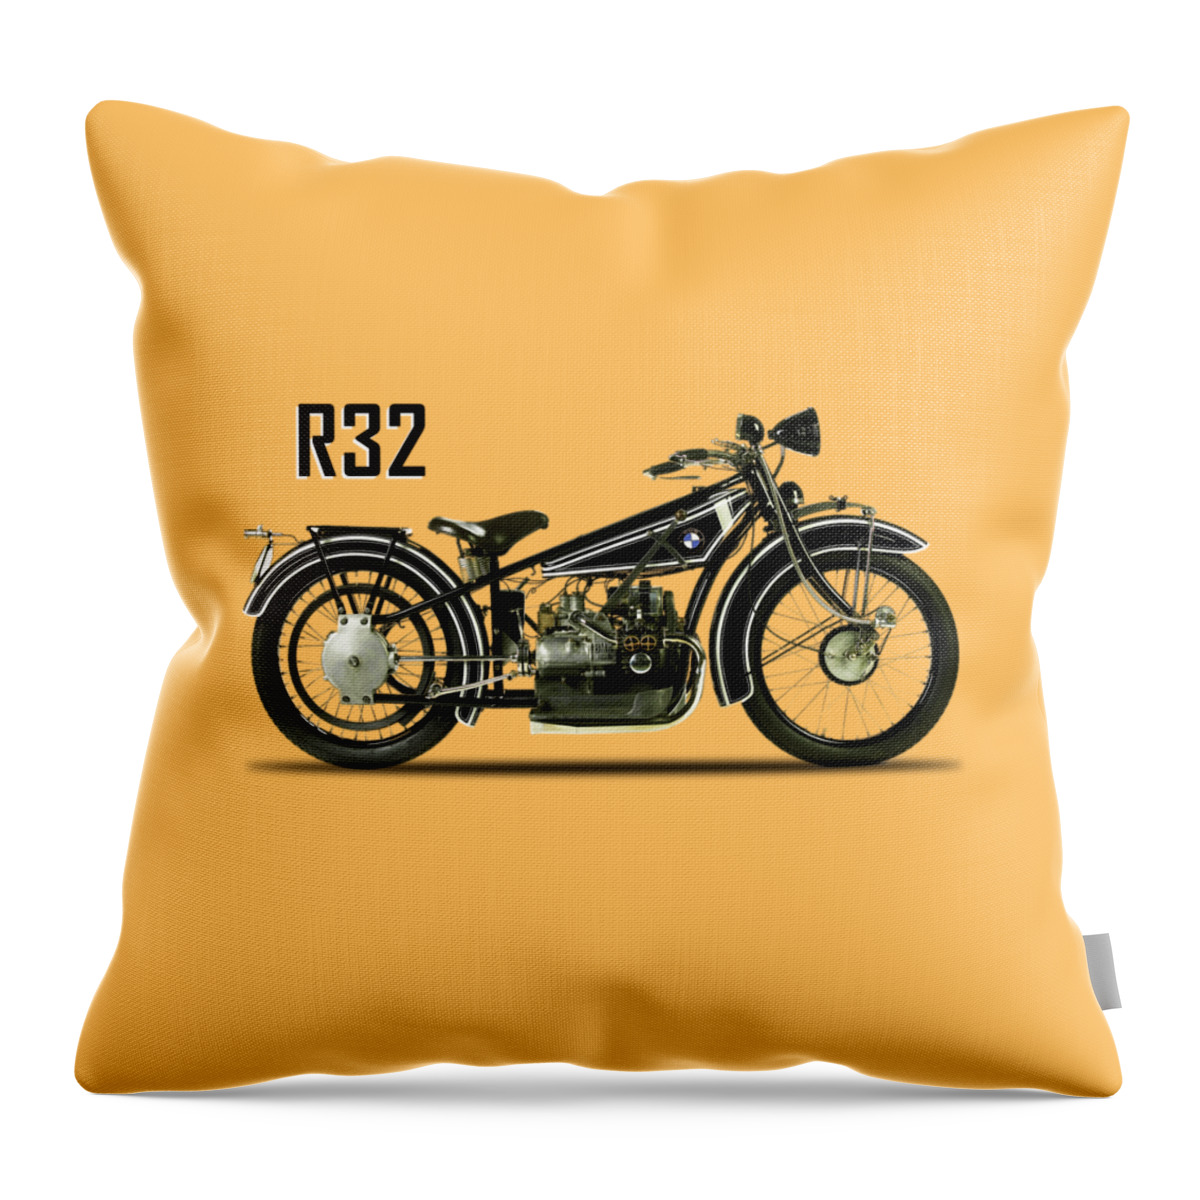 Bmw Throw Pillow featuring the photograph The R32 Motorcycle by Mark Rogan